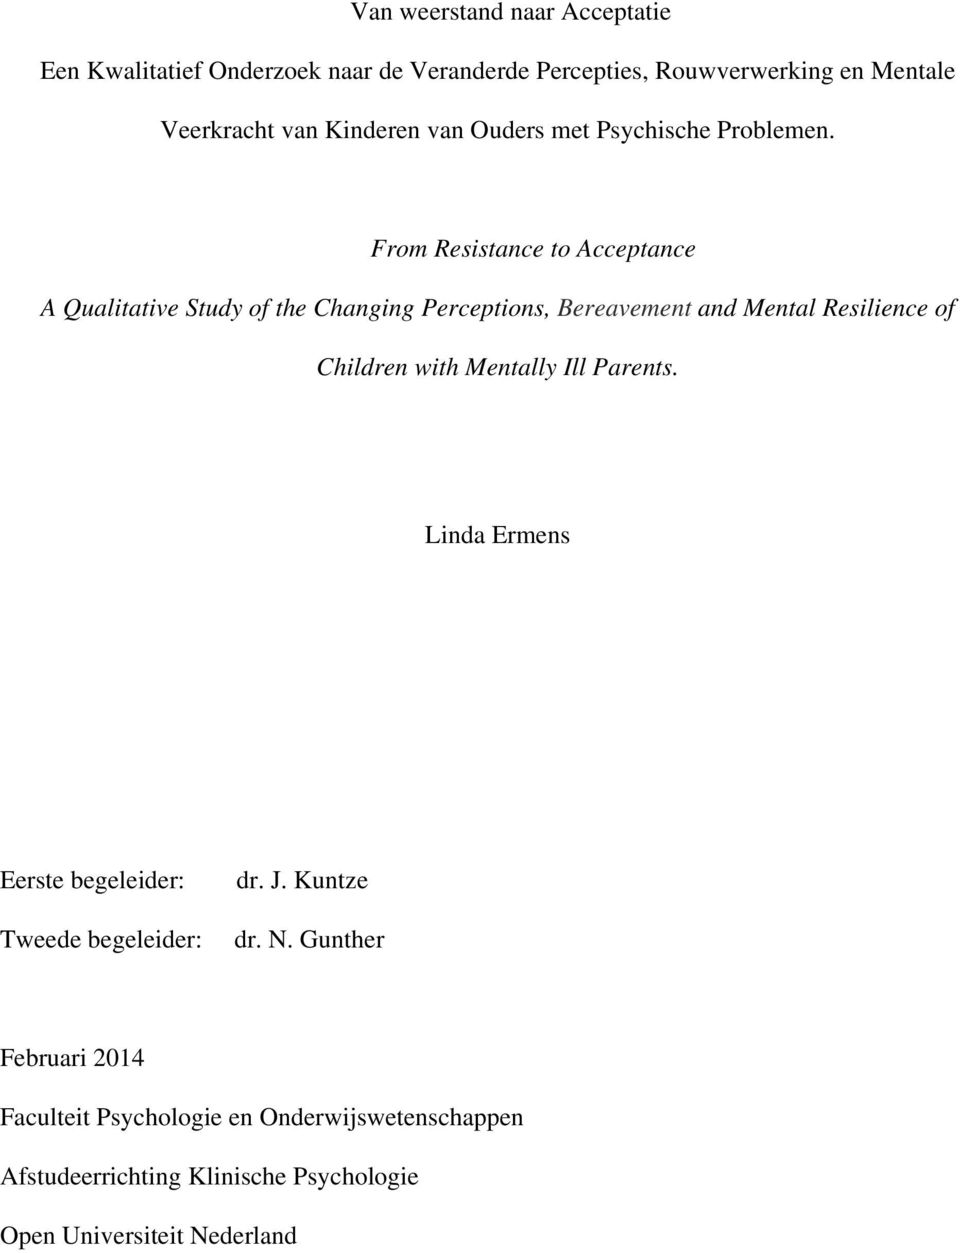 From Resistance to Acceptance A Qualitative Study of the Changing Perceptions, Bereavement and Mental Resilience of Children with